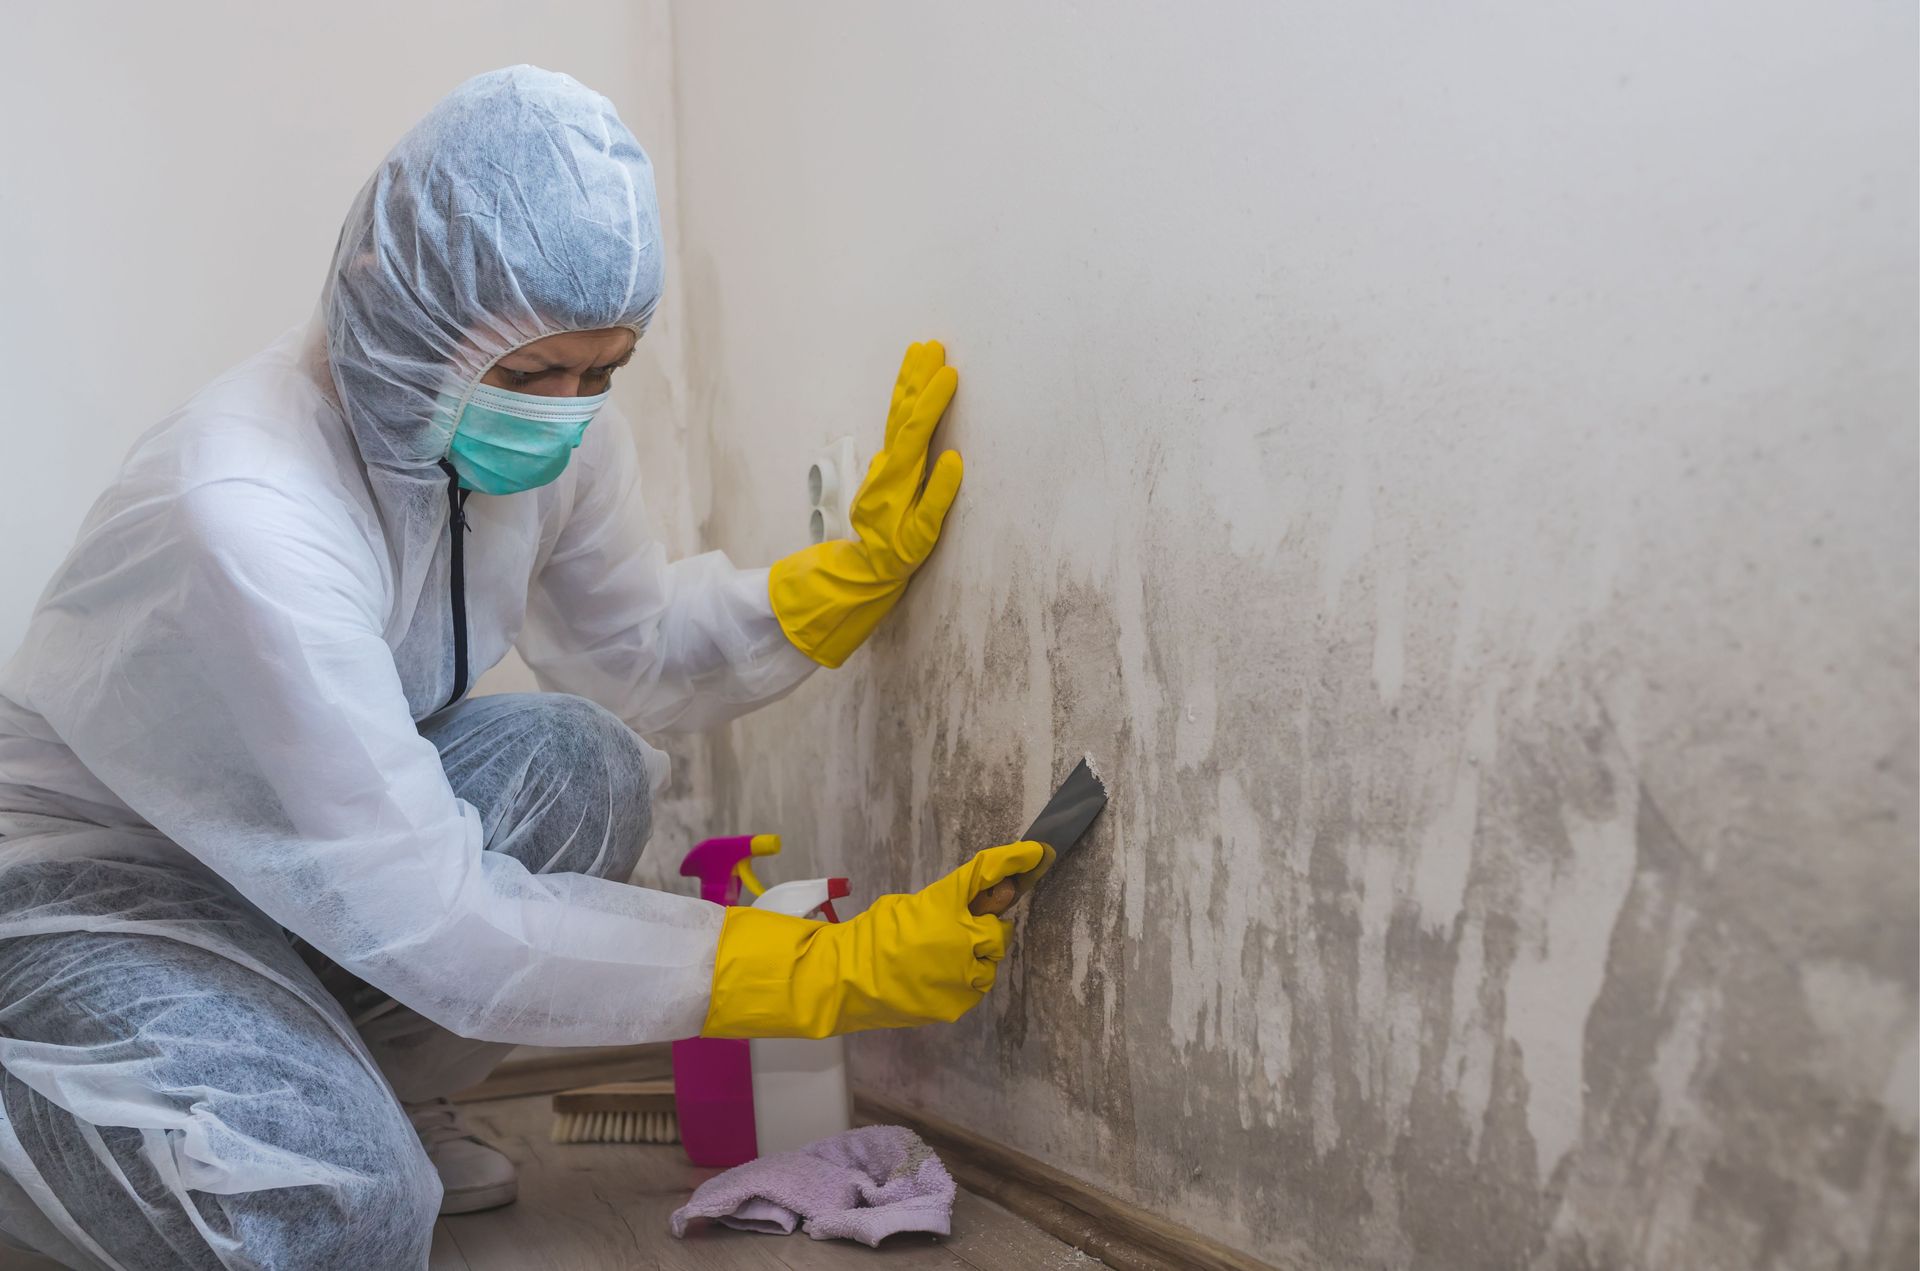 A person in a protective suit is cleaning a wall with a spatula.